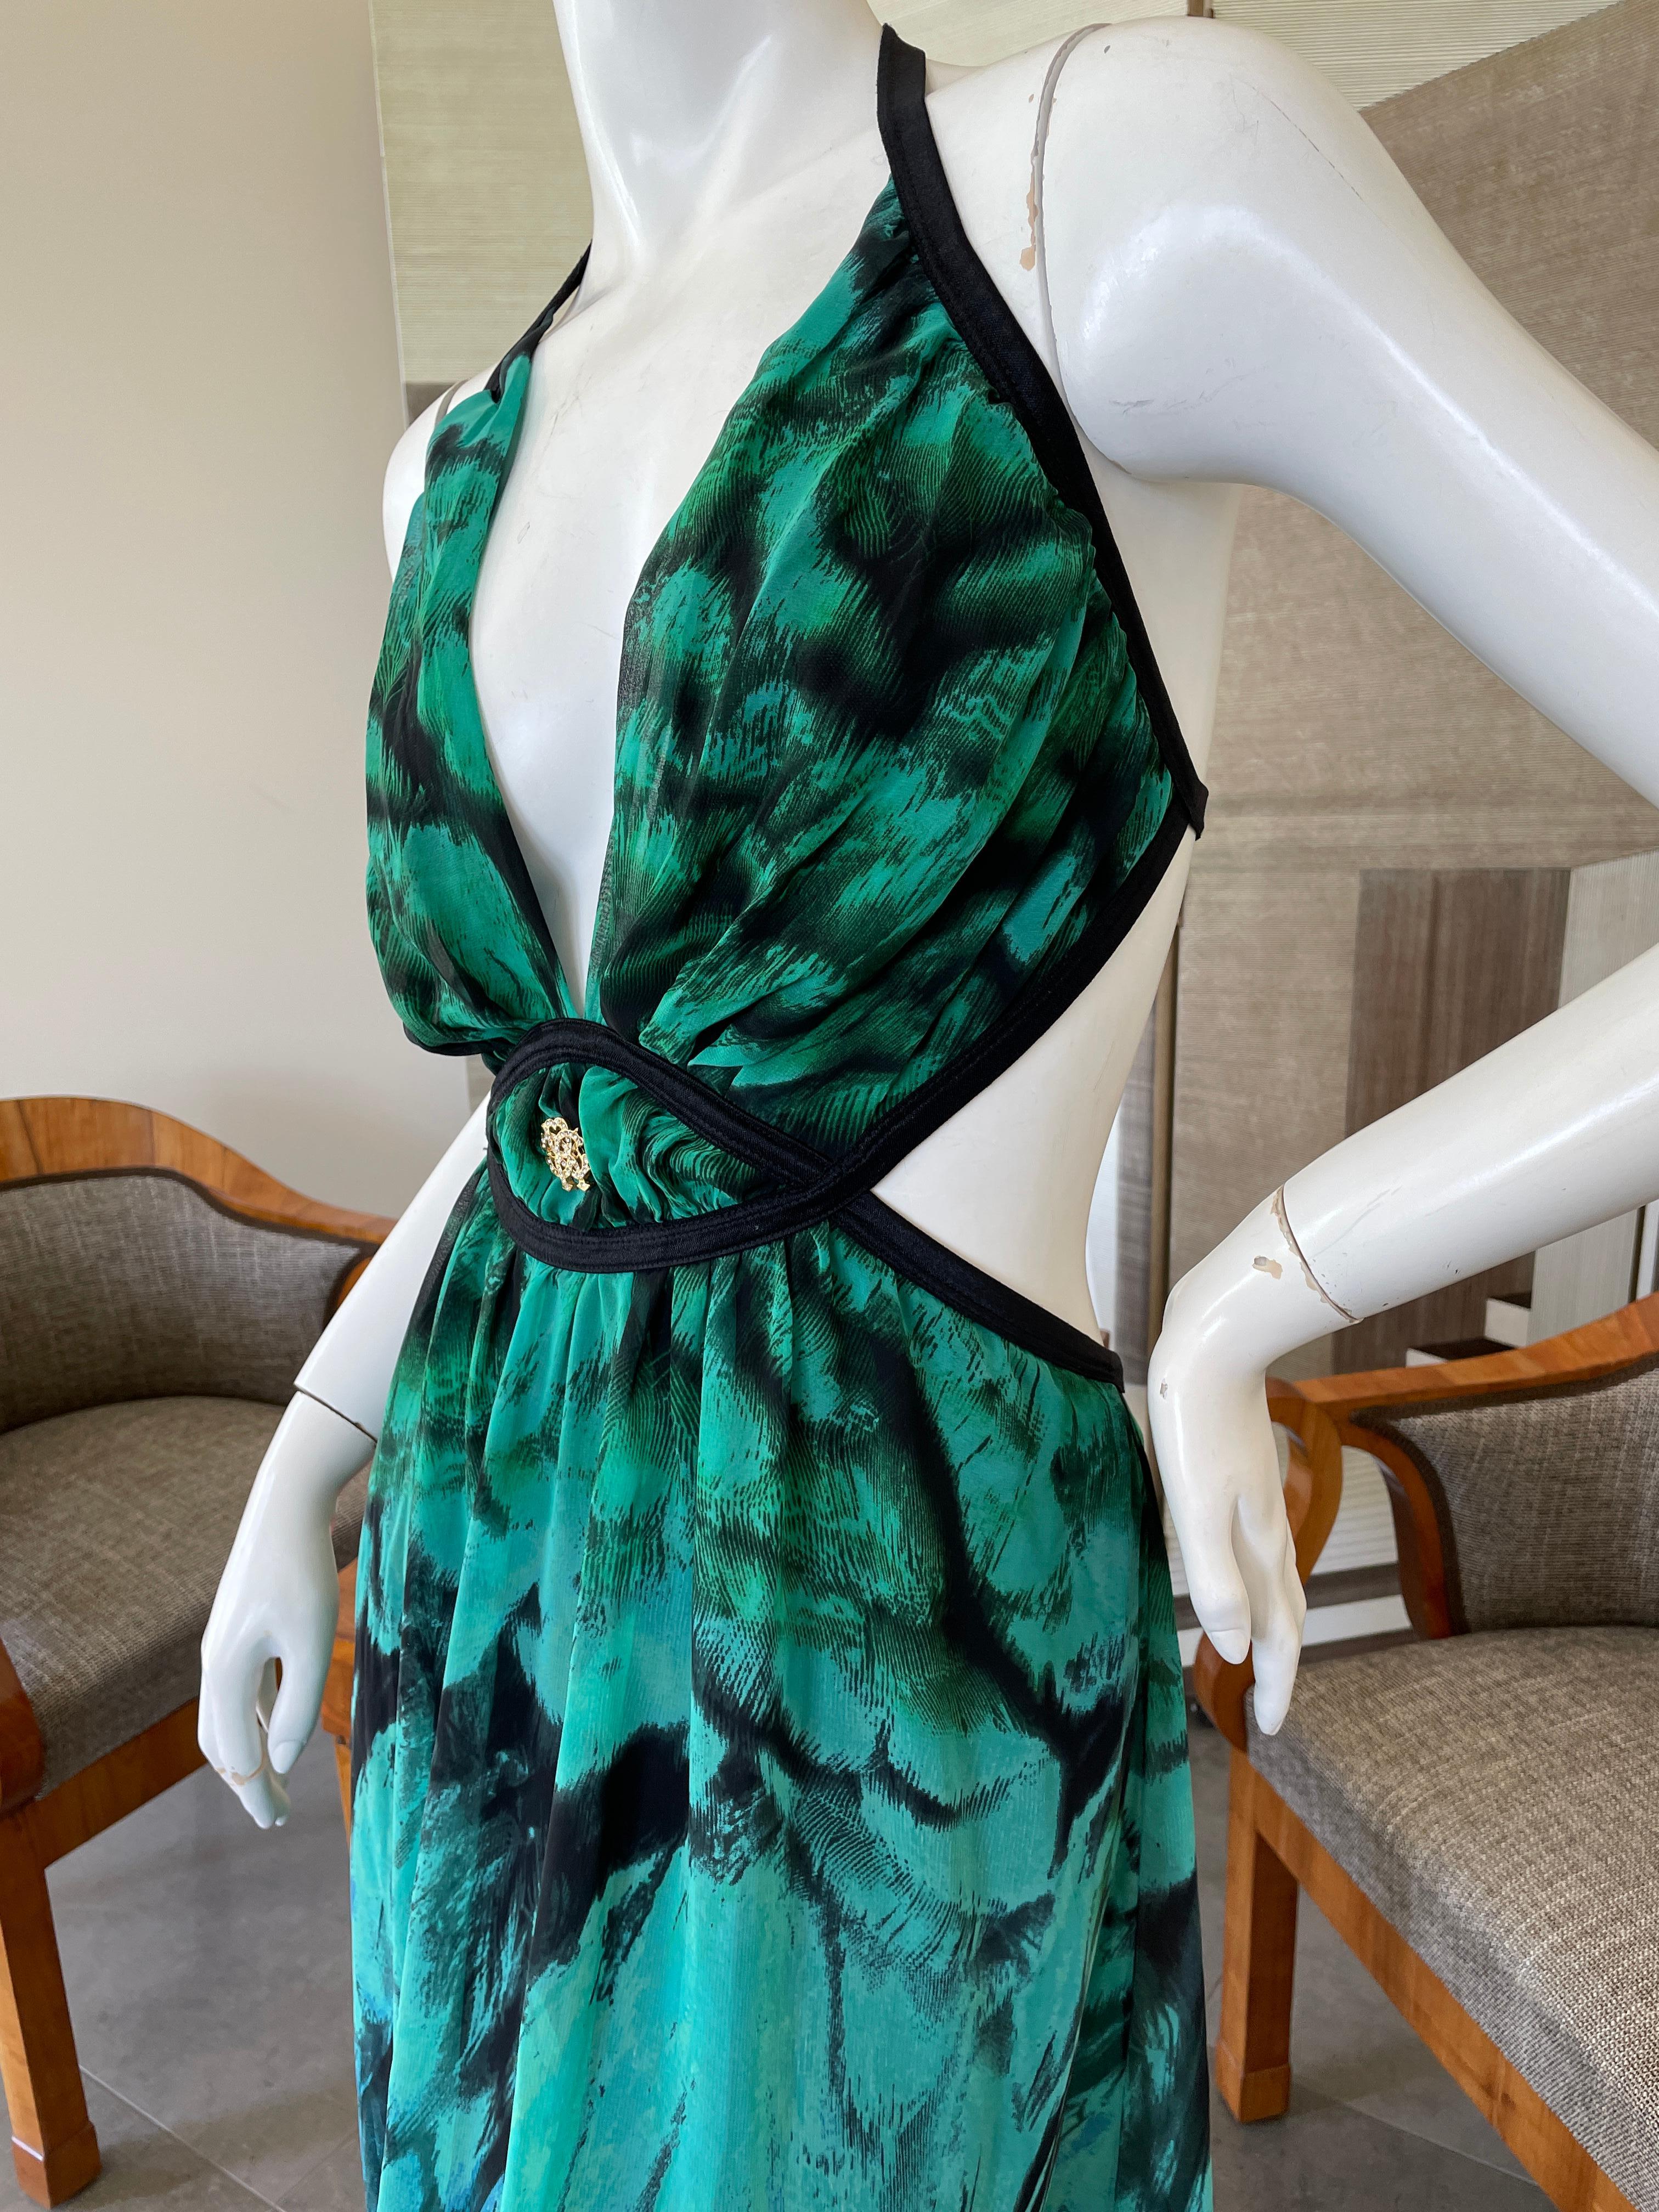 Roberto Cavalli Colorful Vintage Maxi Dress with Cut Out Sides In Excellent Condition For Sale In Cloverdale, CA